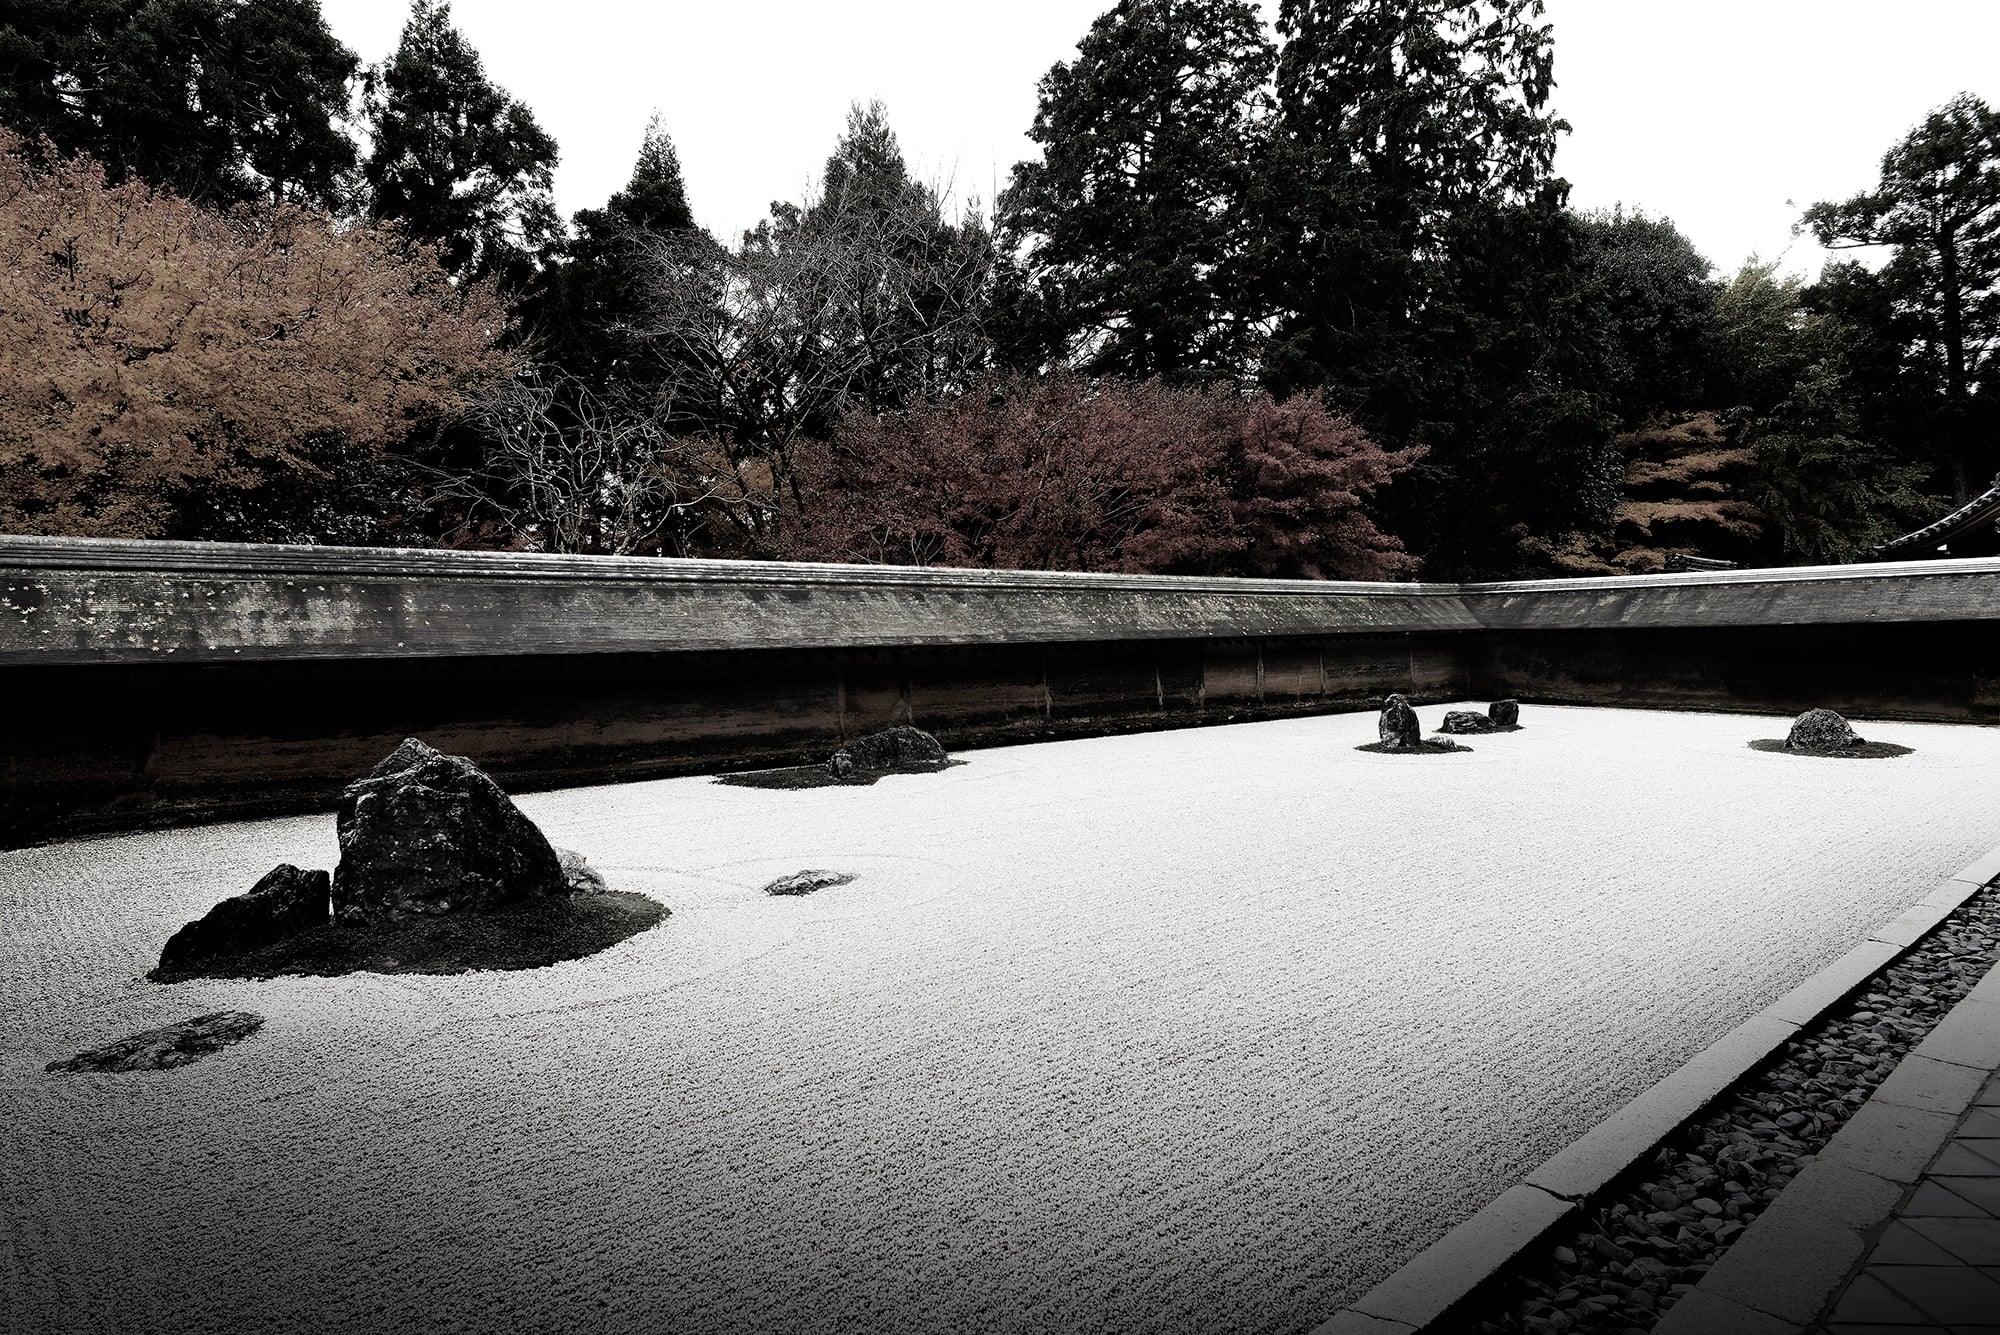 Maeda faced the true identity of the Japanese aesthetics. From the stone garden in Ryoanji temple, he discovered the beauty of empty space. He noticed that by removing the elements, an infinite nature spreads beyond the empty space of the stone garden. He also realised that the beauty was to be felt in the heart, and cannot be seen. Nikkei Design / Junya Hirokawa “Mazda Design, Design Branding Business” Nikkei BP Company Publication